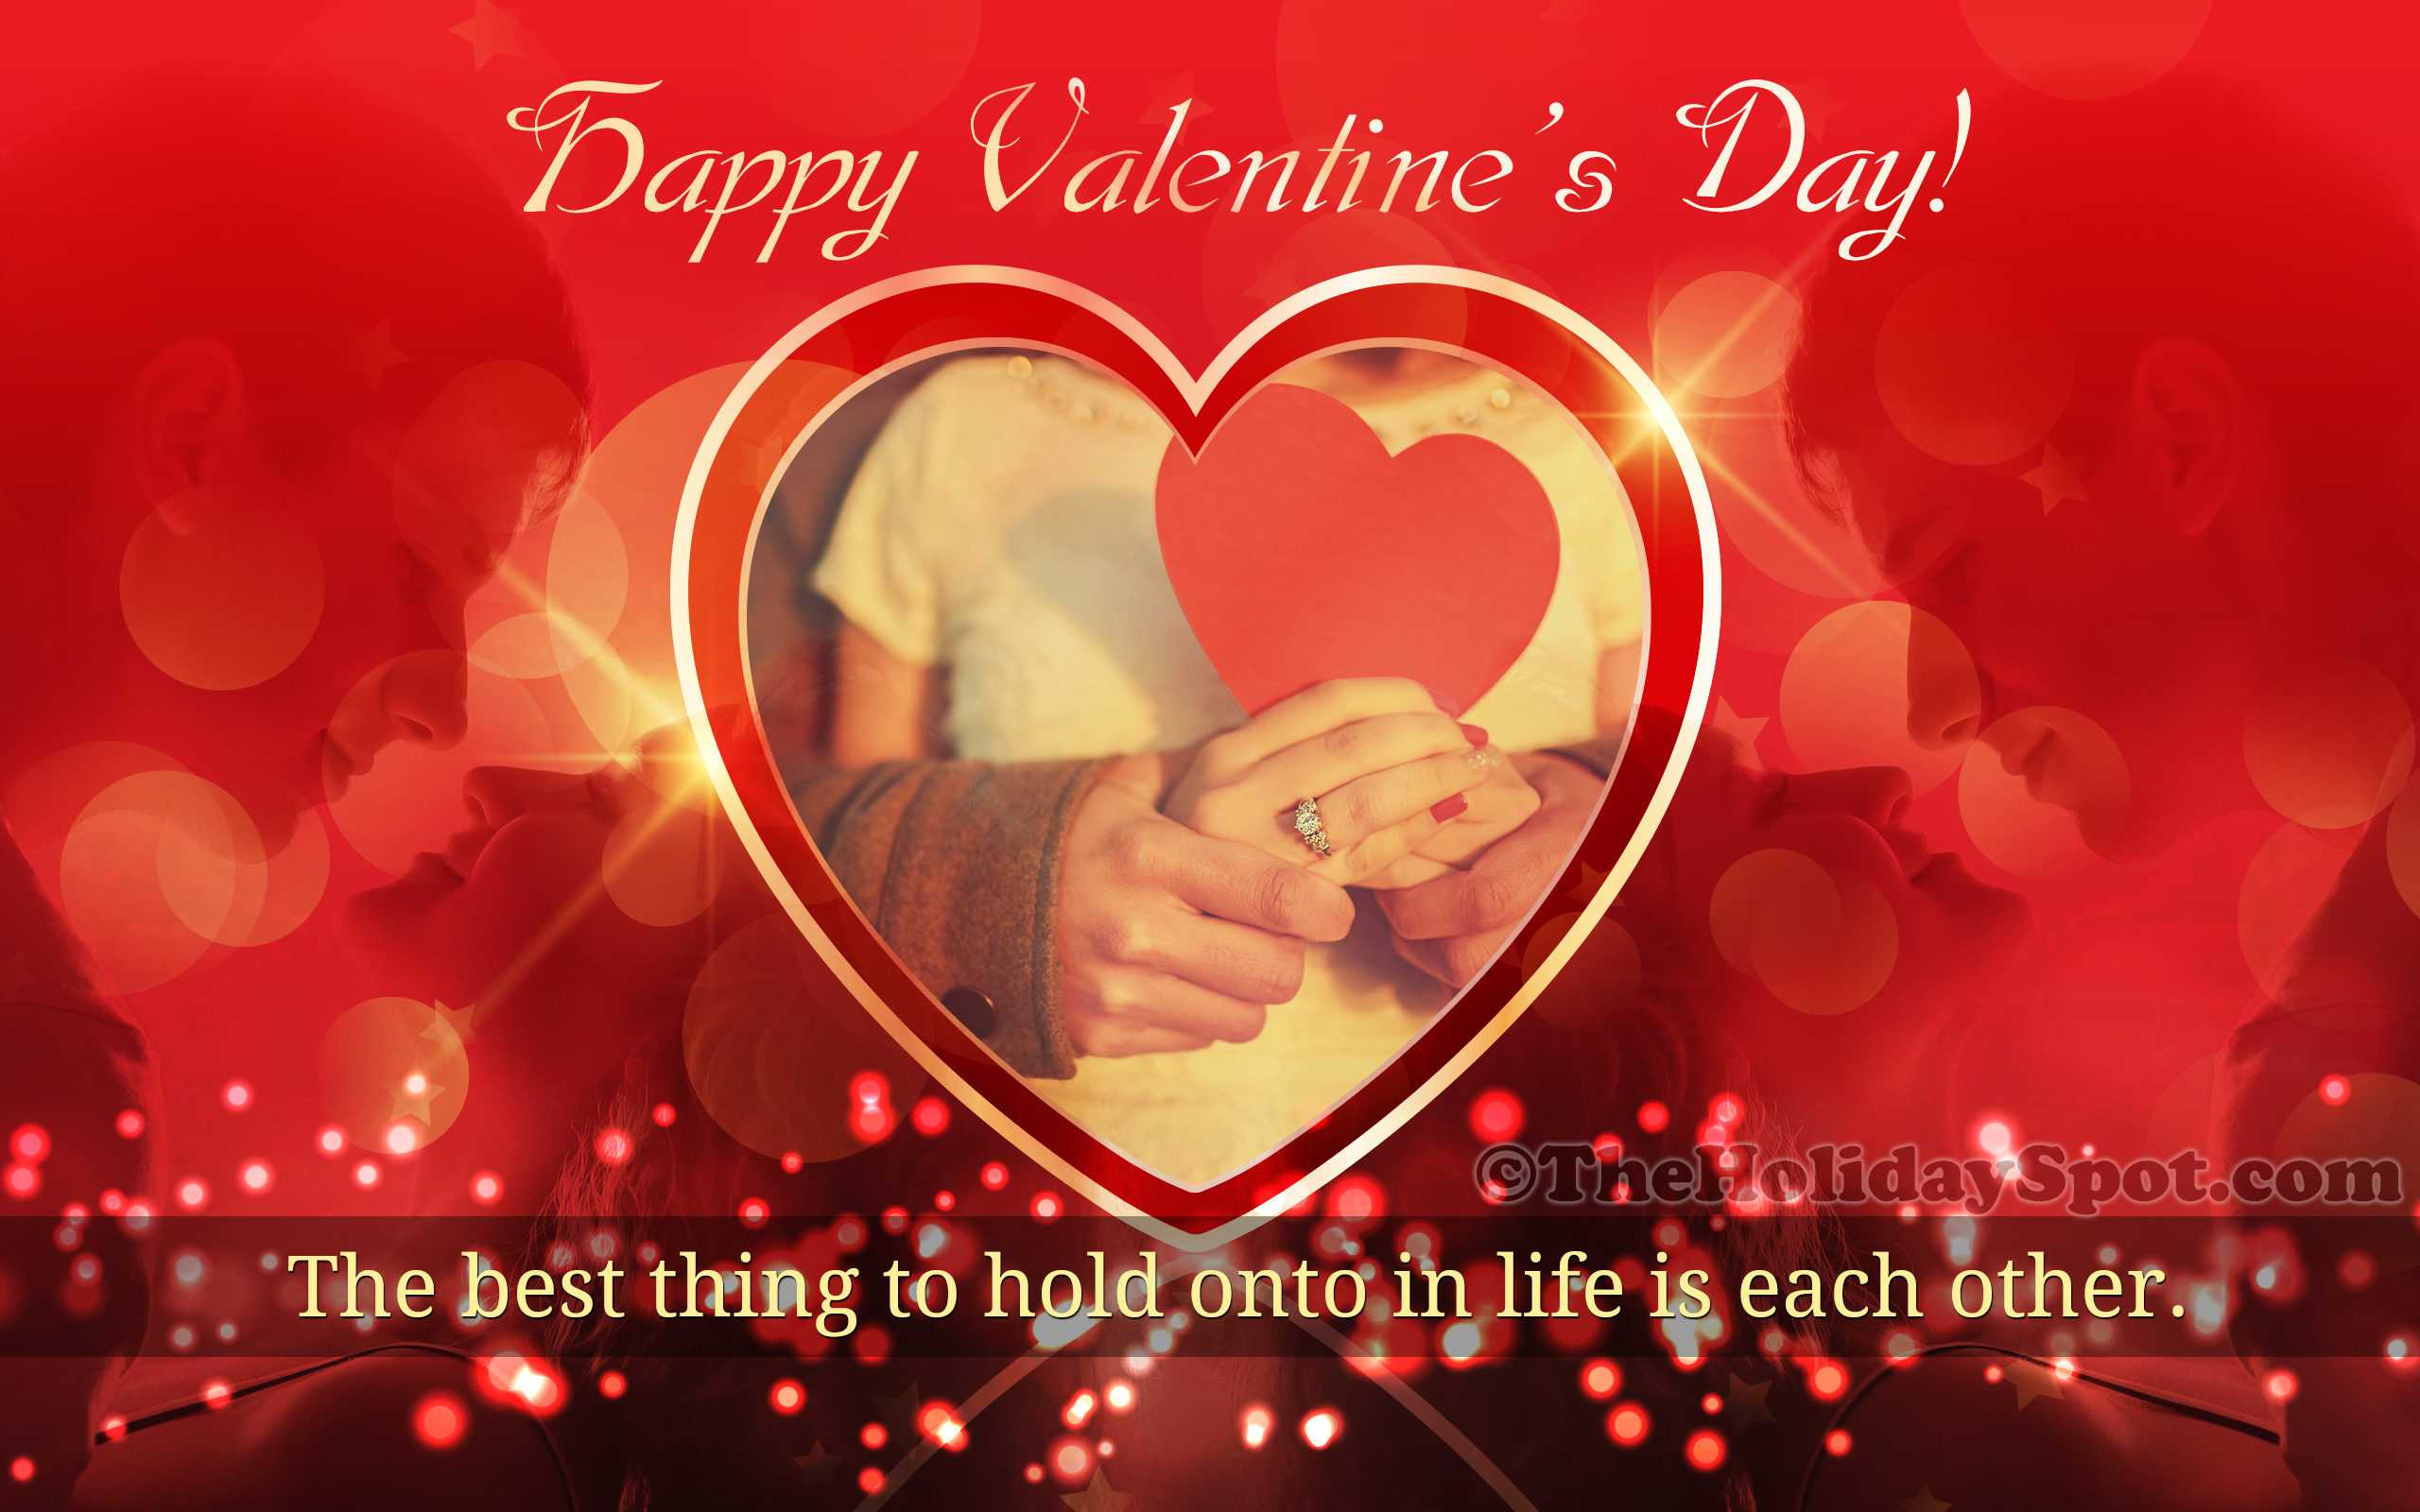 85+ Valentines Day Wallpapers HD and Images to Download